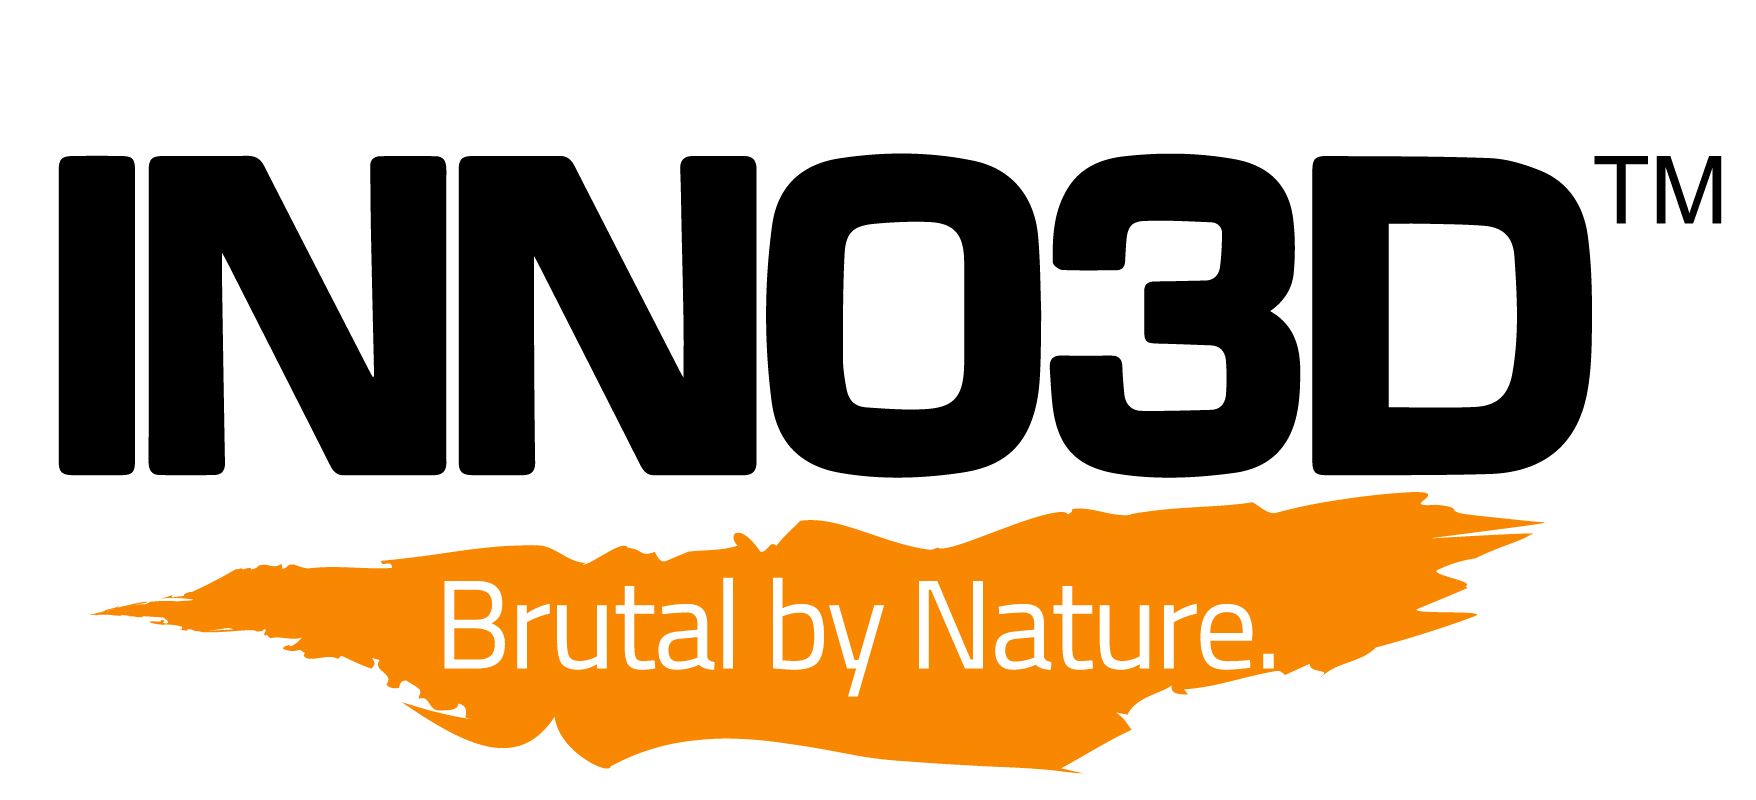 INNO3D presents its new outlined logo and slogan.